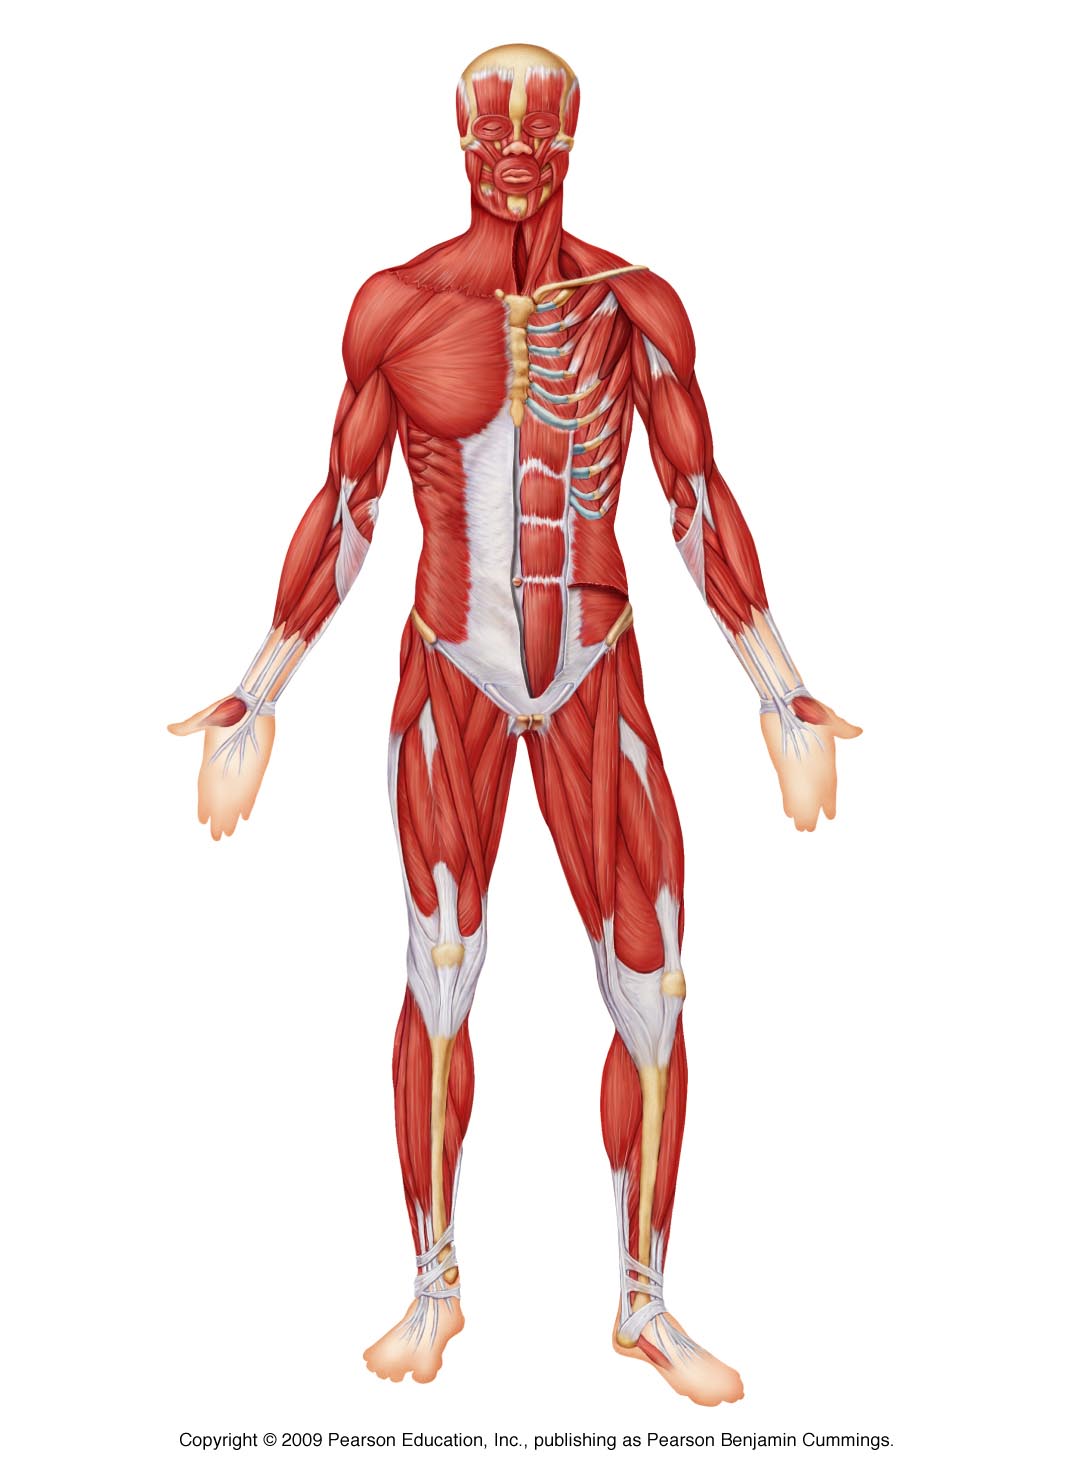 muscles of the body unlabeled - ModernHeal.com.